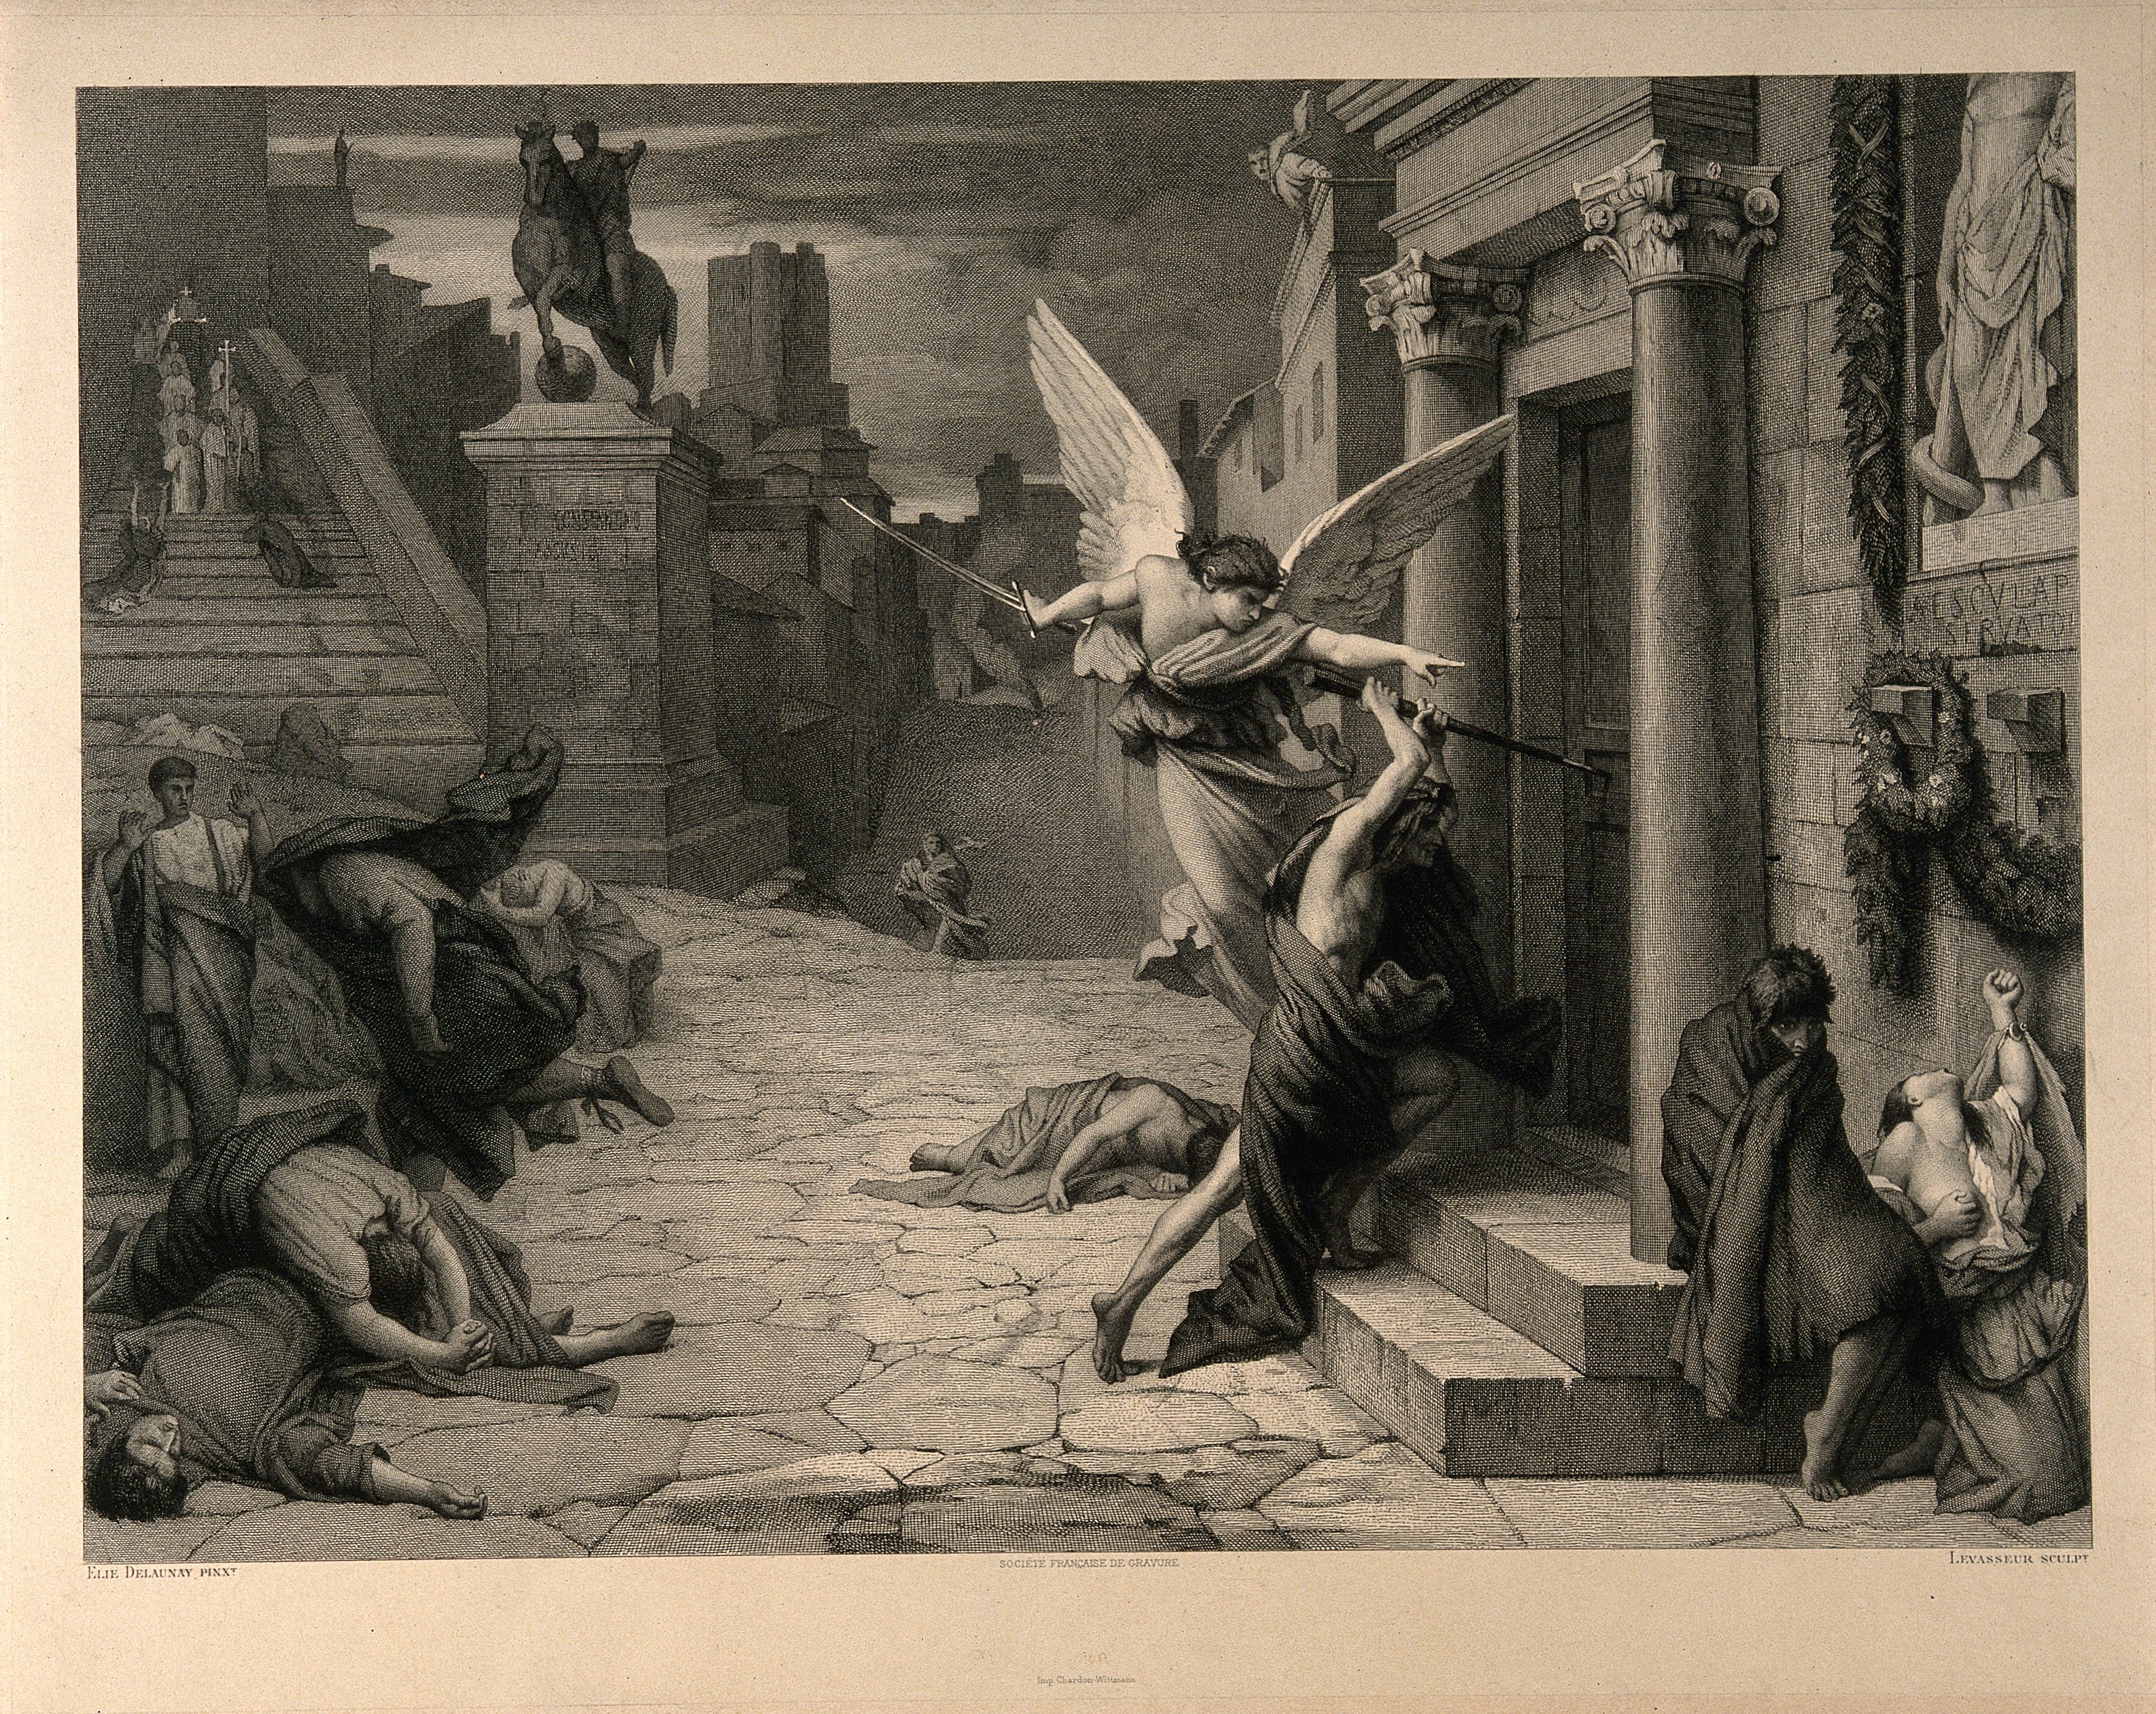 The angel of death striking a door during the plague of Rome. Engraving by Levasseur after J. Delaunay.